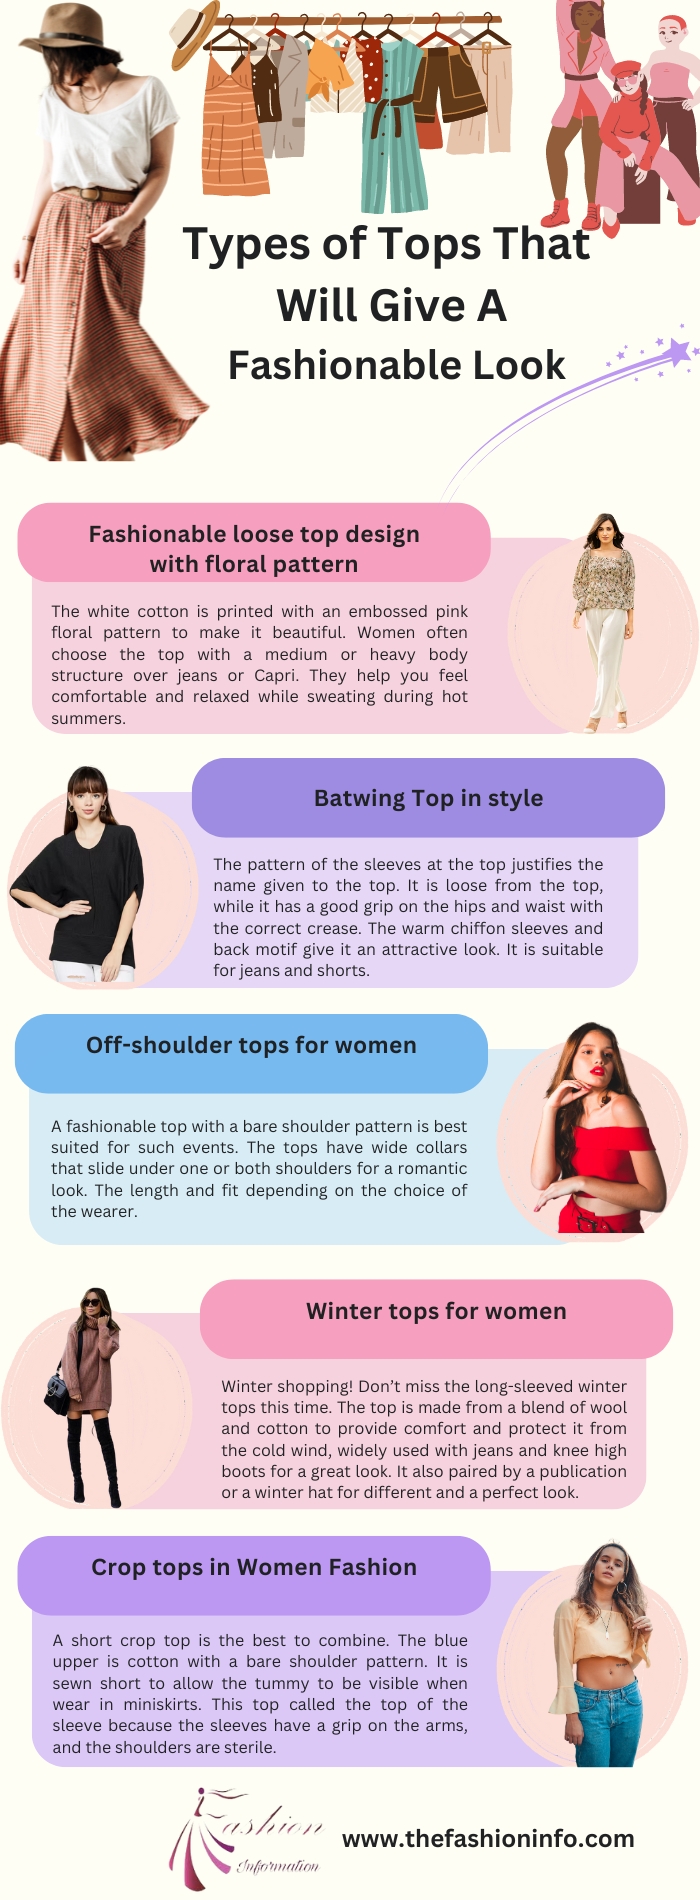 Types of tops that will give a fashionable look